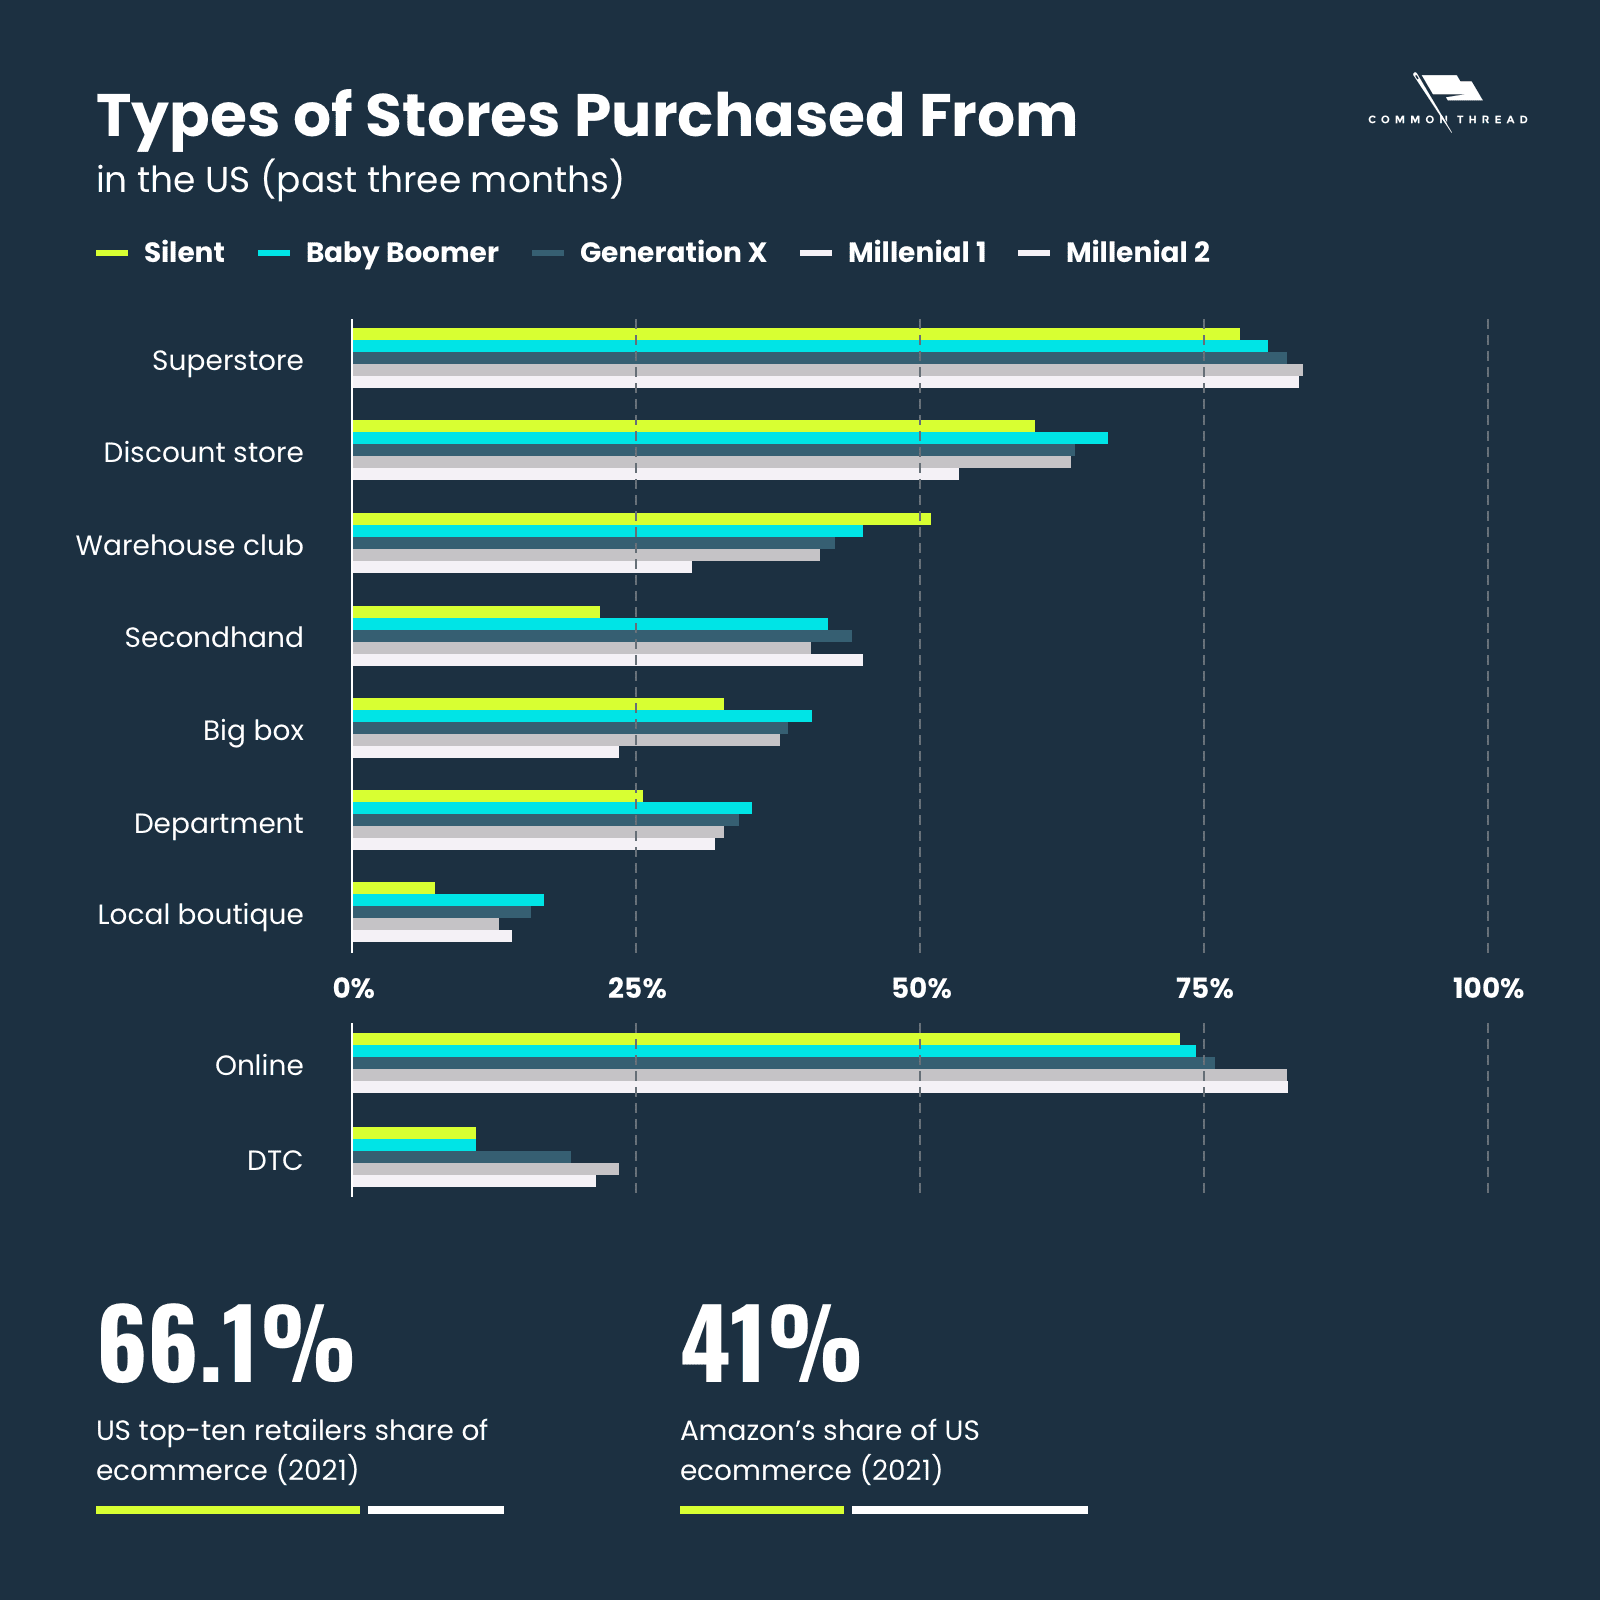 Types of Stores Purchased From and Top Online Retailers